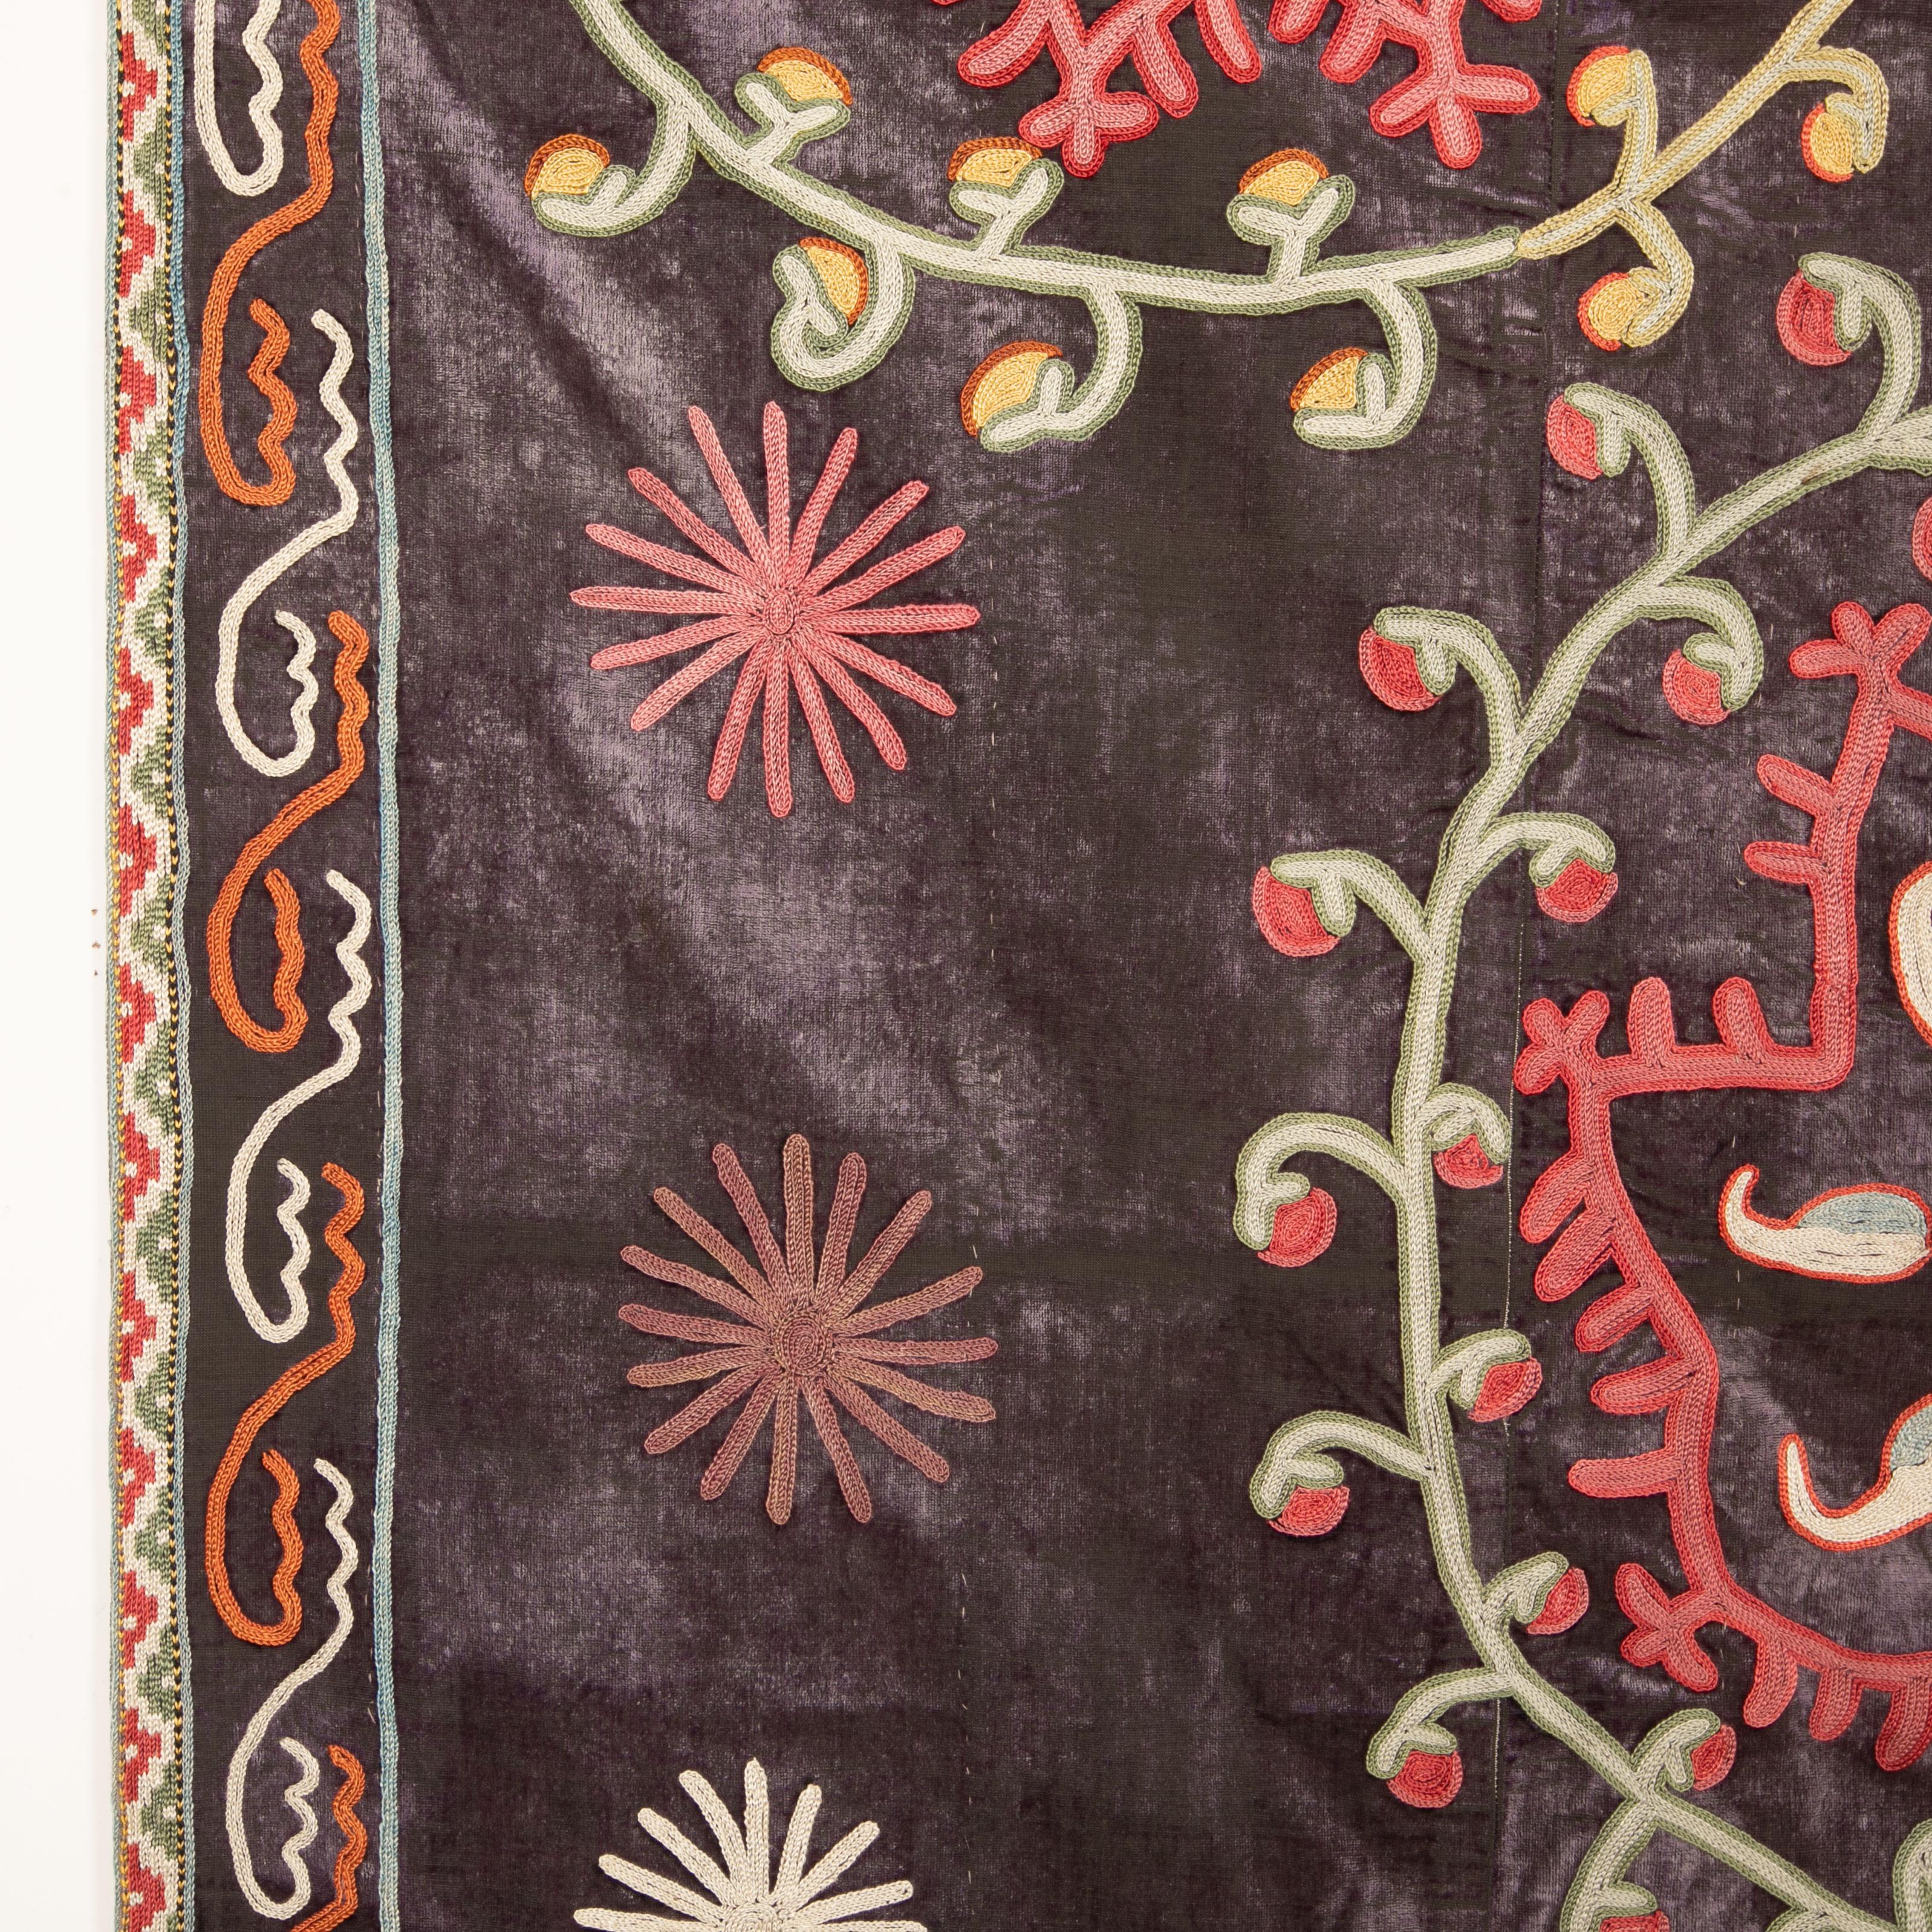 Embroidered Early 20th C. Velvet Suzani from Uzbekistan